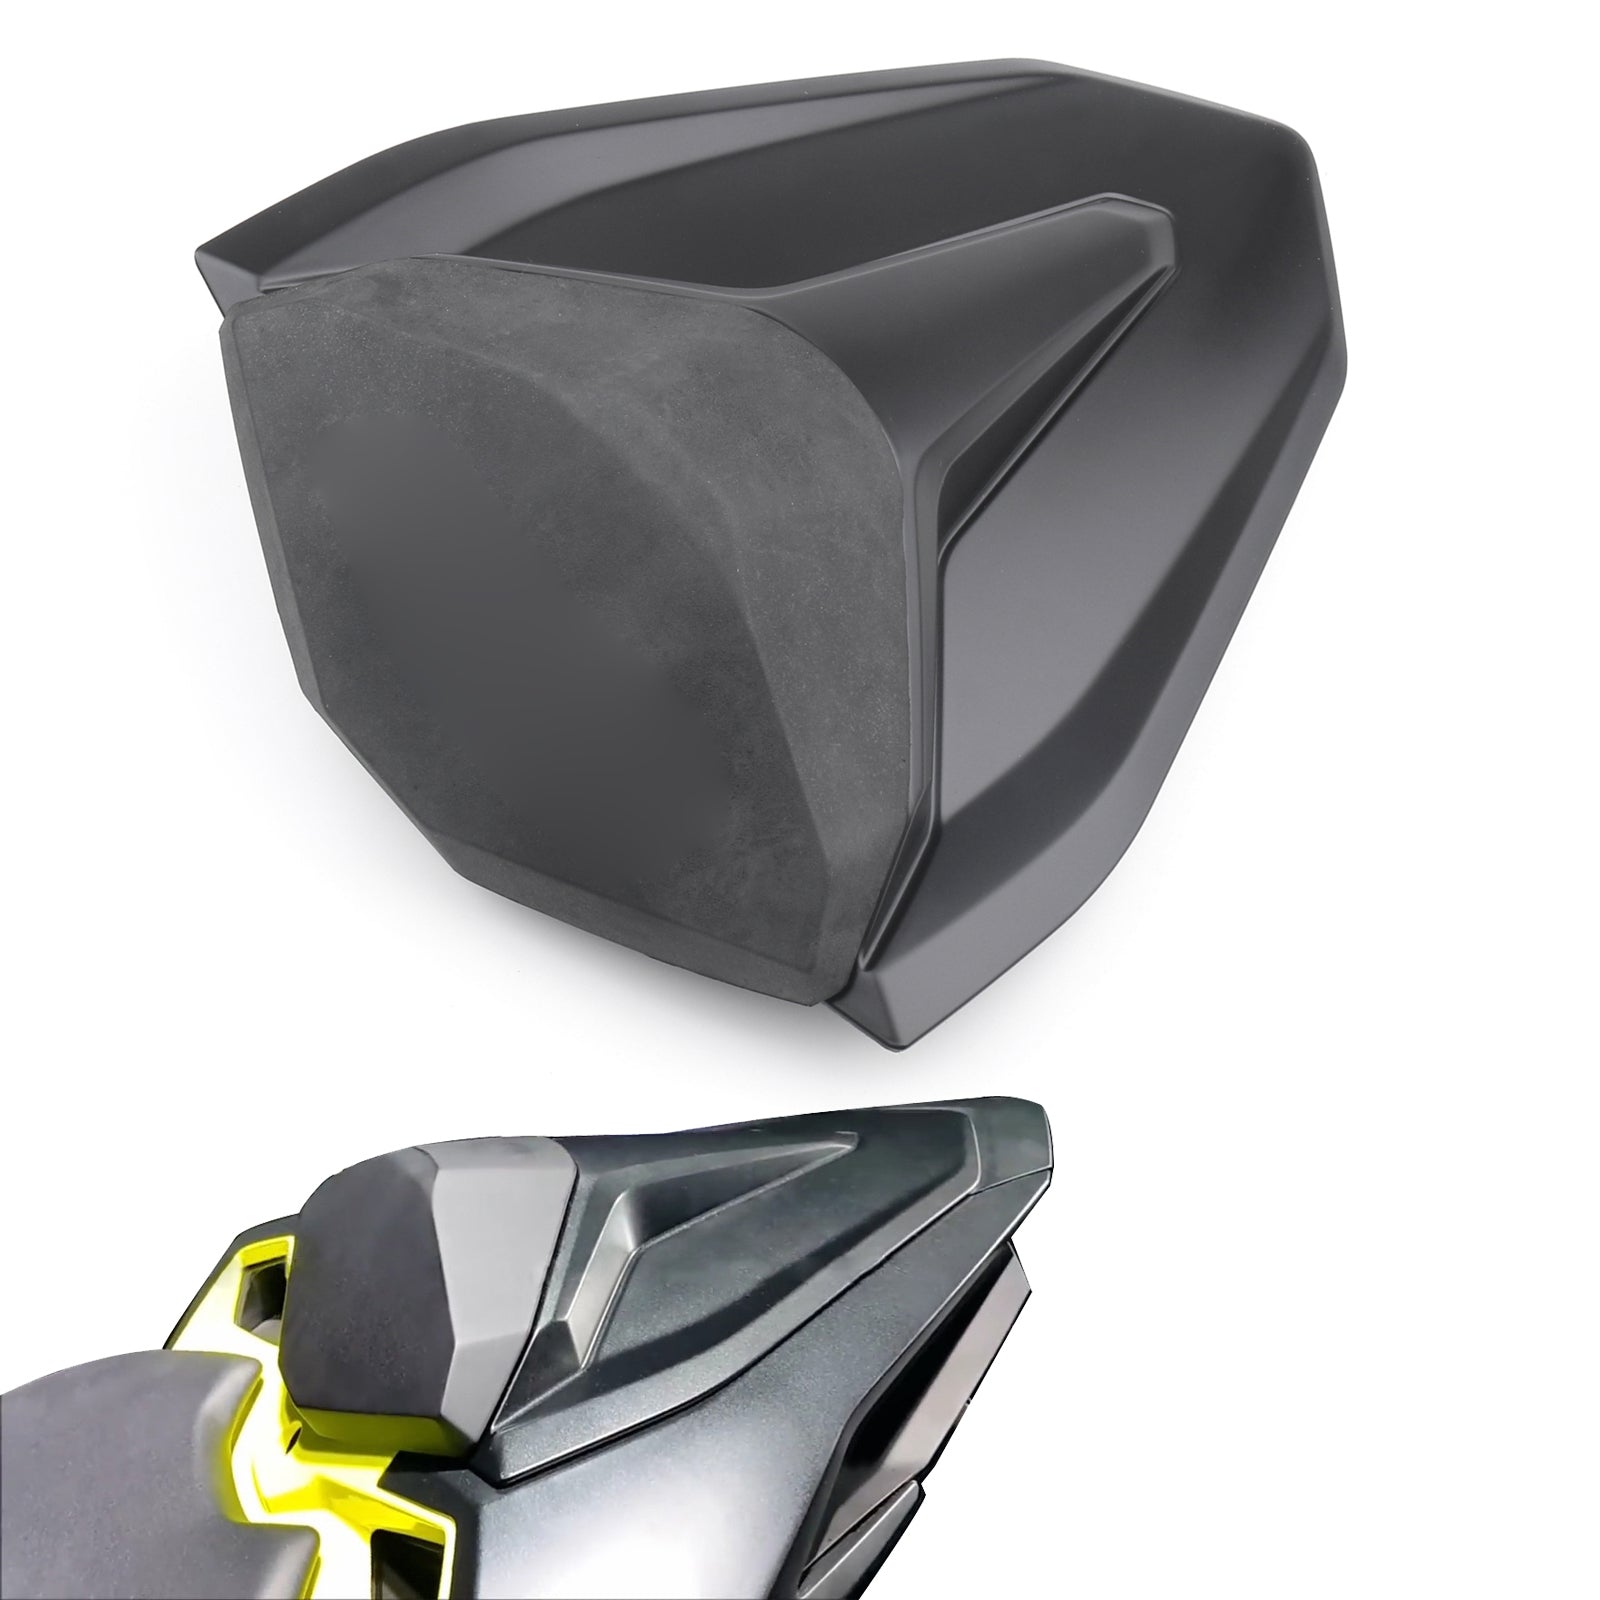 Motorcycle Pillion Rear Seat Cover Cowl ABS For Honda CBR250RR 2017-2019 Generic